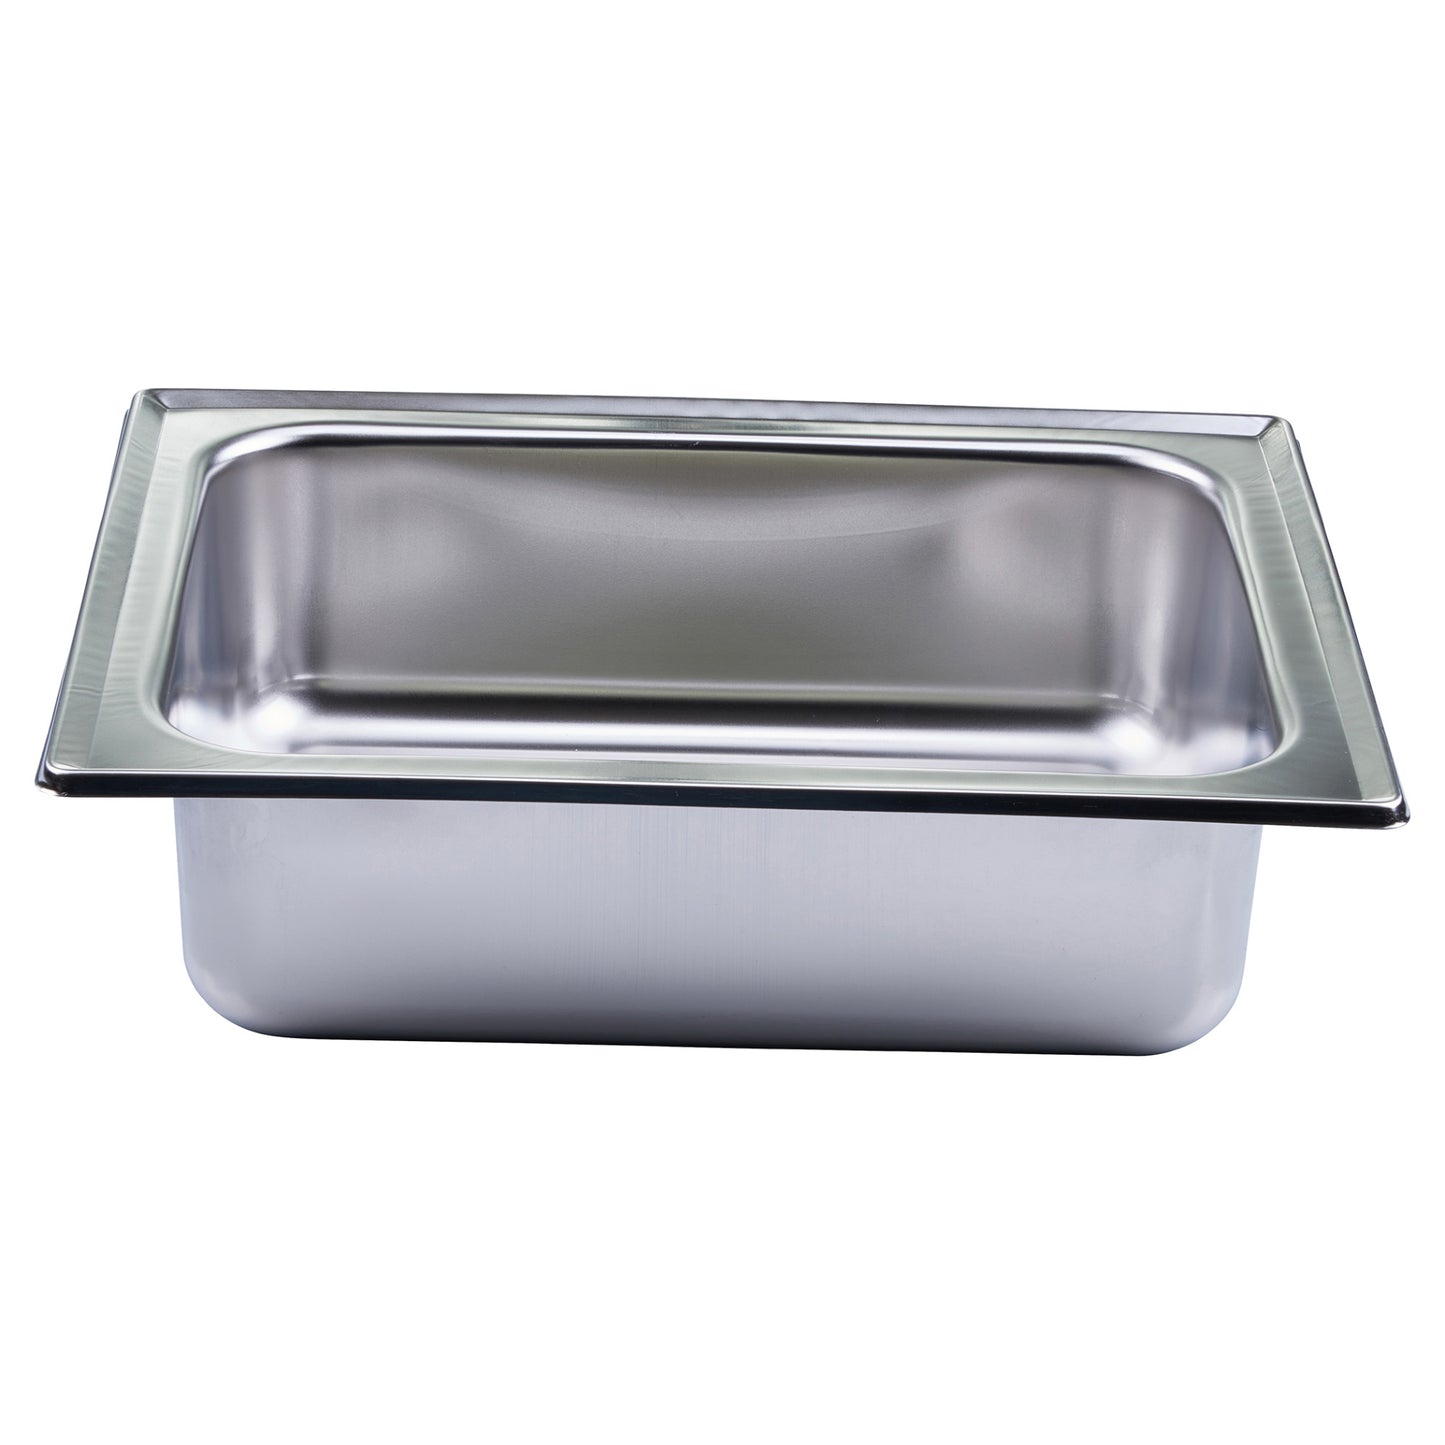 508-WP - Water Pan for 508